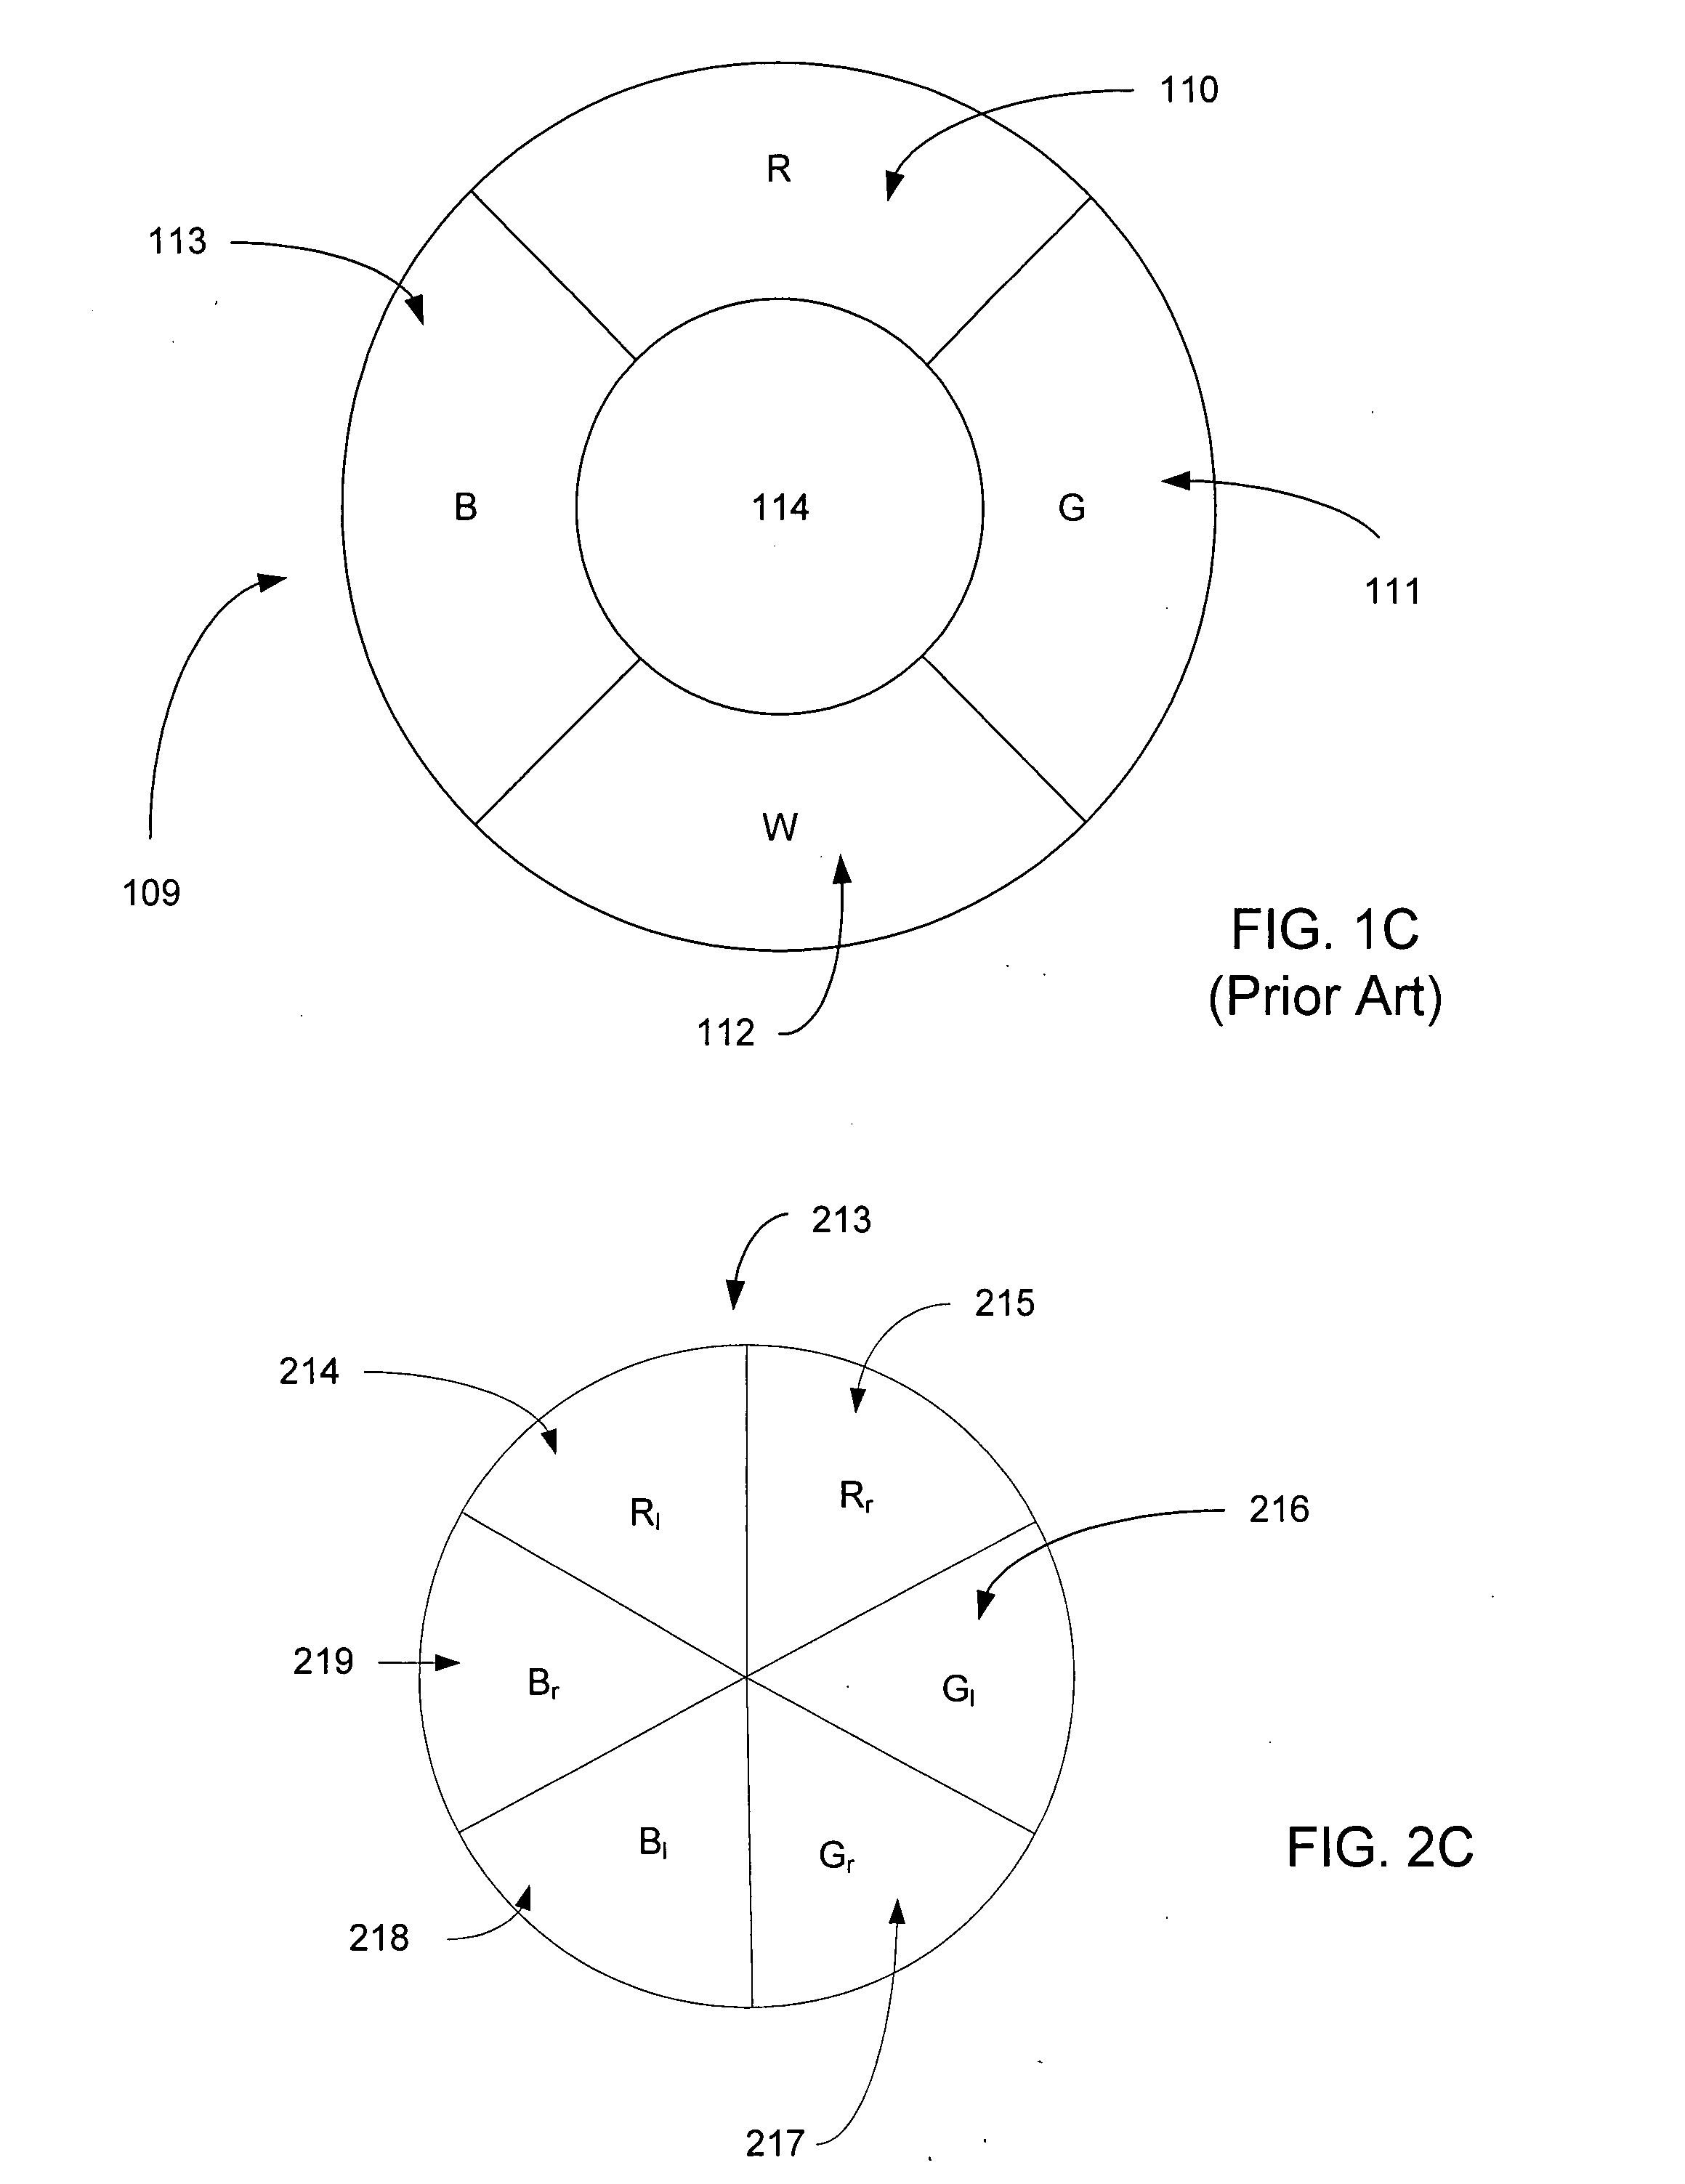 Optical concatenation for field sequential stereoscpoic displays